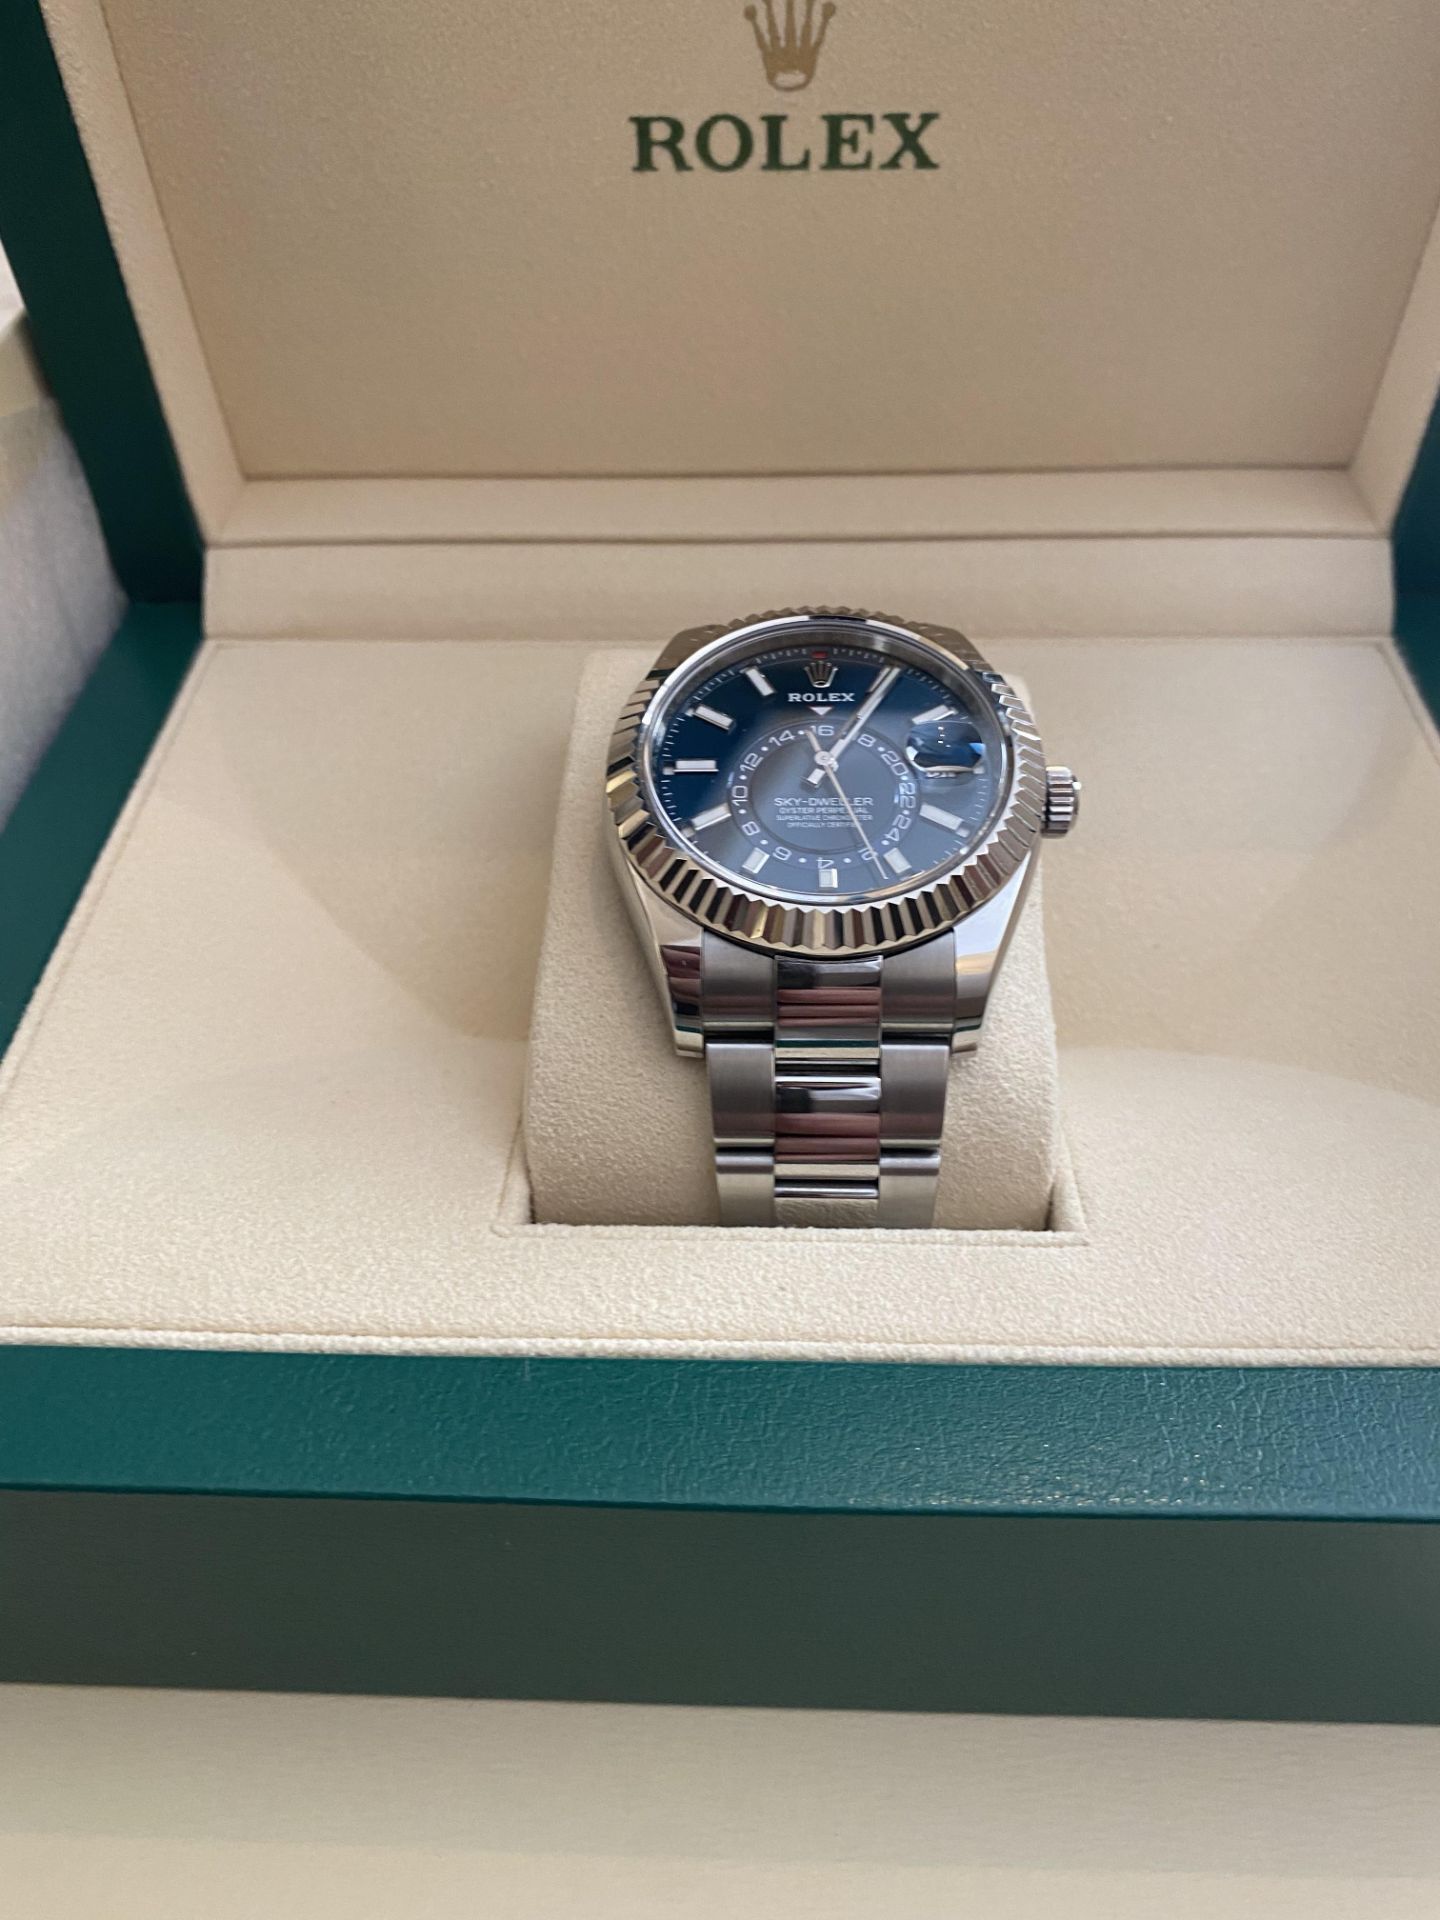 2018 ROLEX SKY DWELLER OYSTER 42MM OYSTERSTEEL & WHITE GOLD **BLUE DIAL** - Image 3 of 12